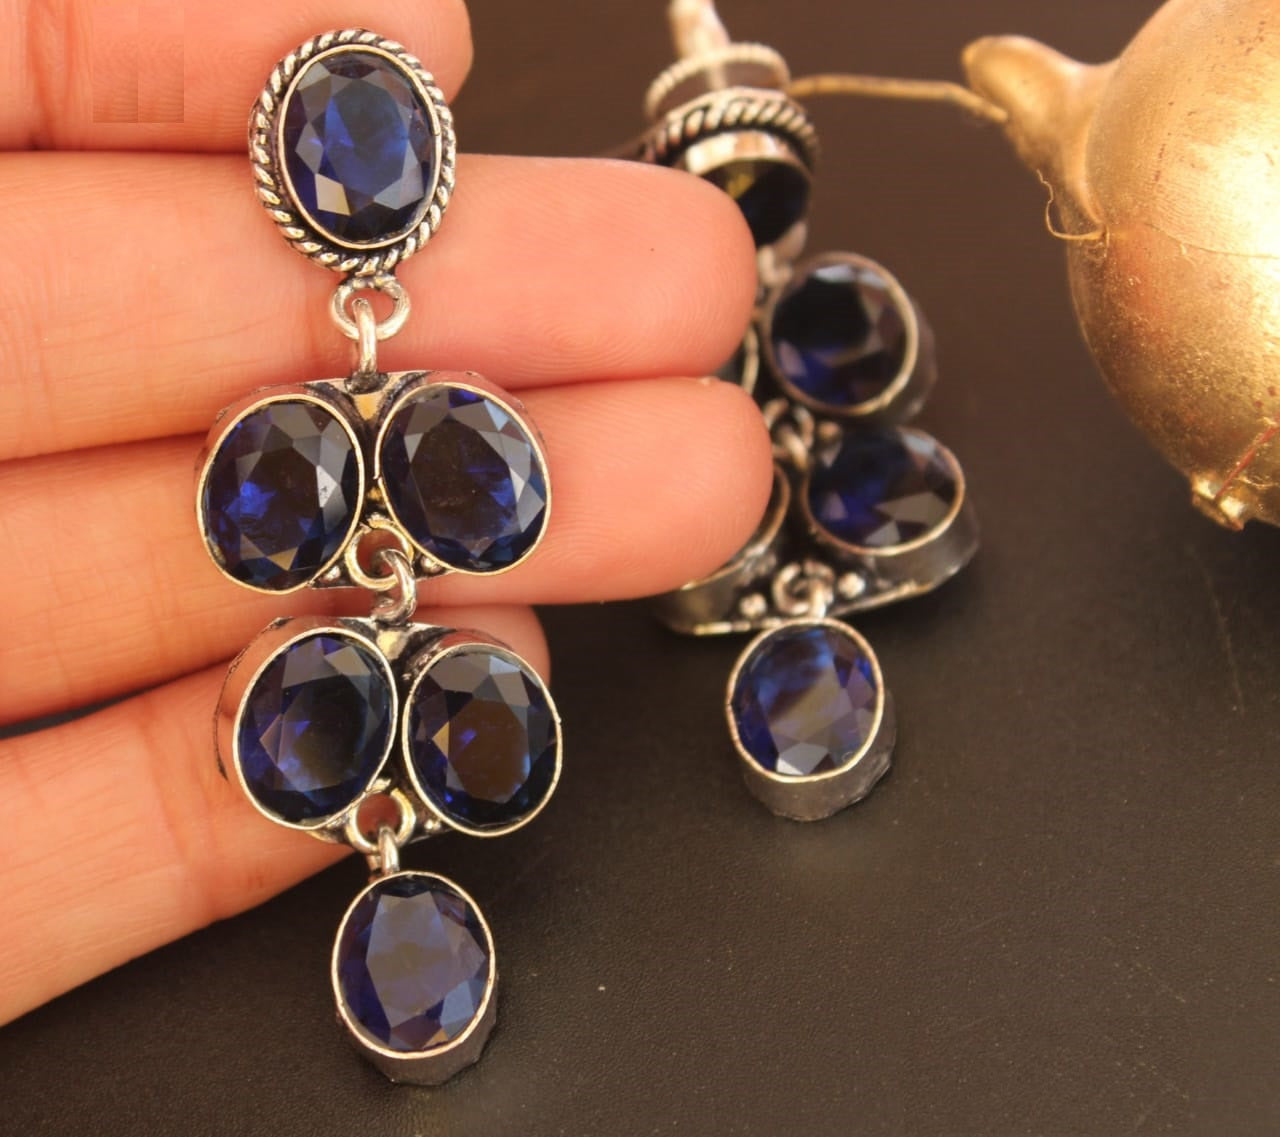 Artistic Collections- Earing- Blue Stones @ DressingStylesCA.com